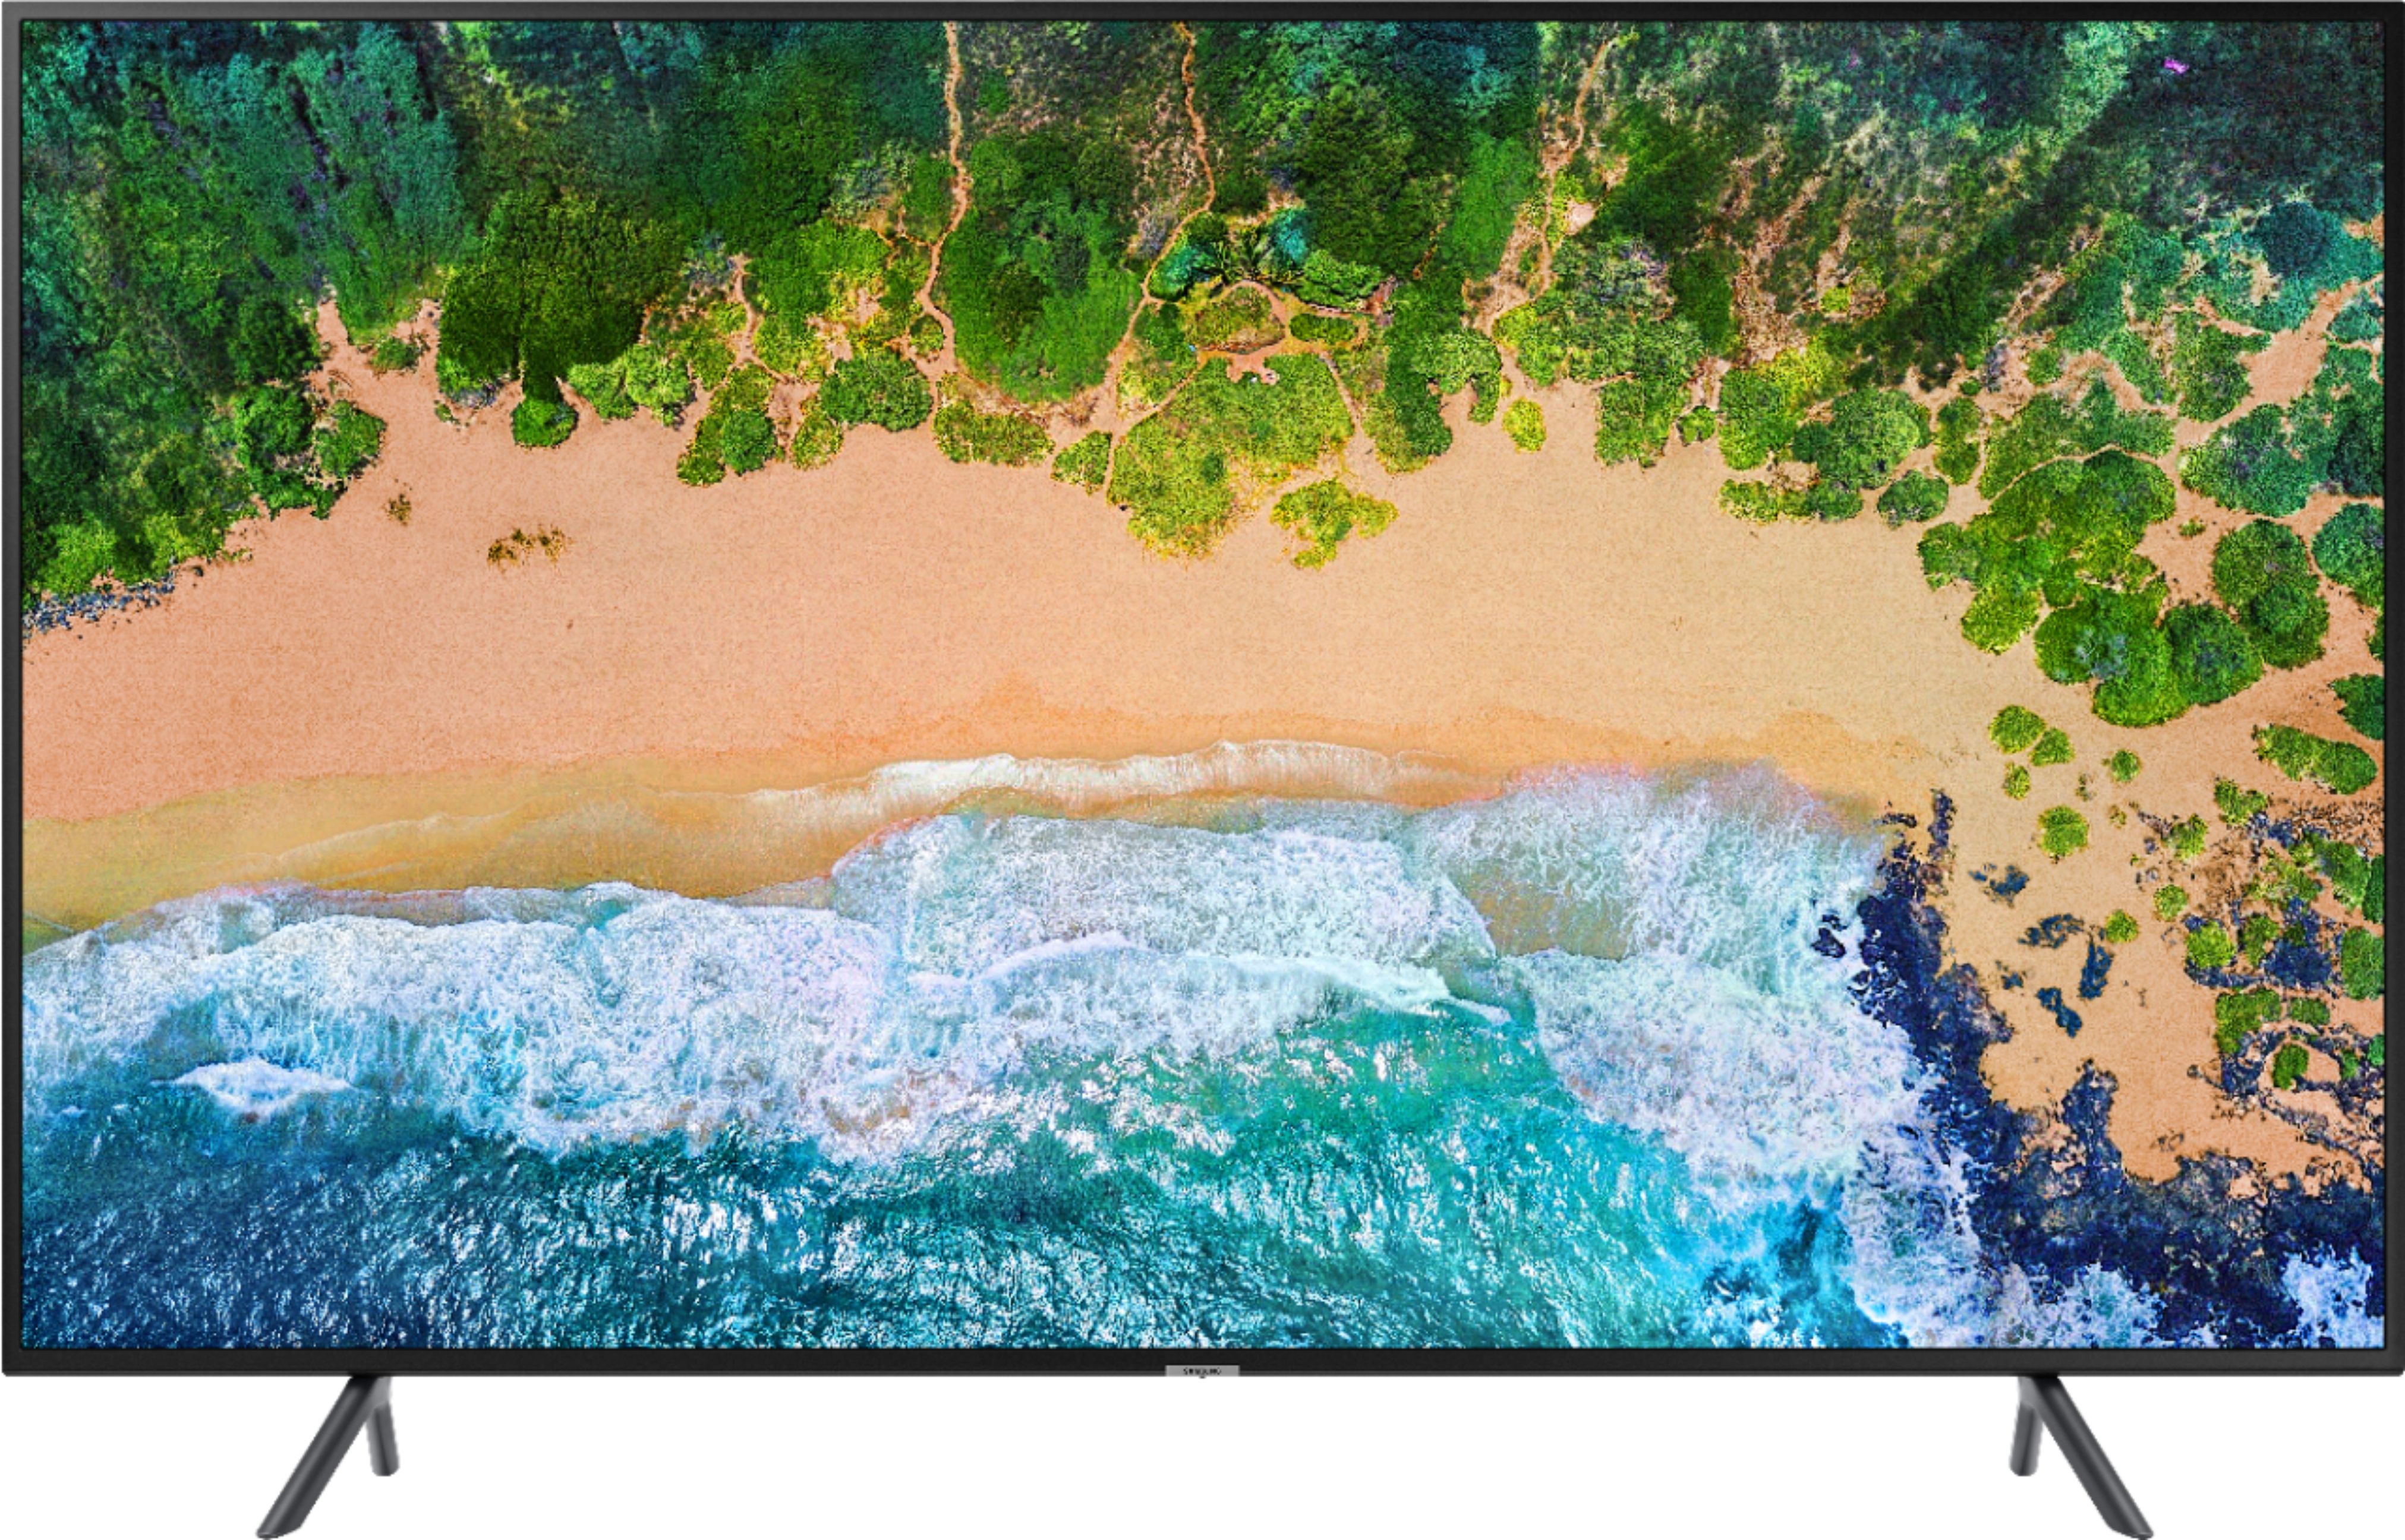 Samsung 40-inch NU7100 TV - Full Review and Benchmarks